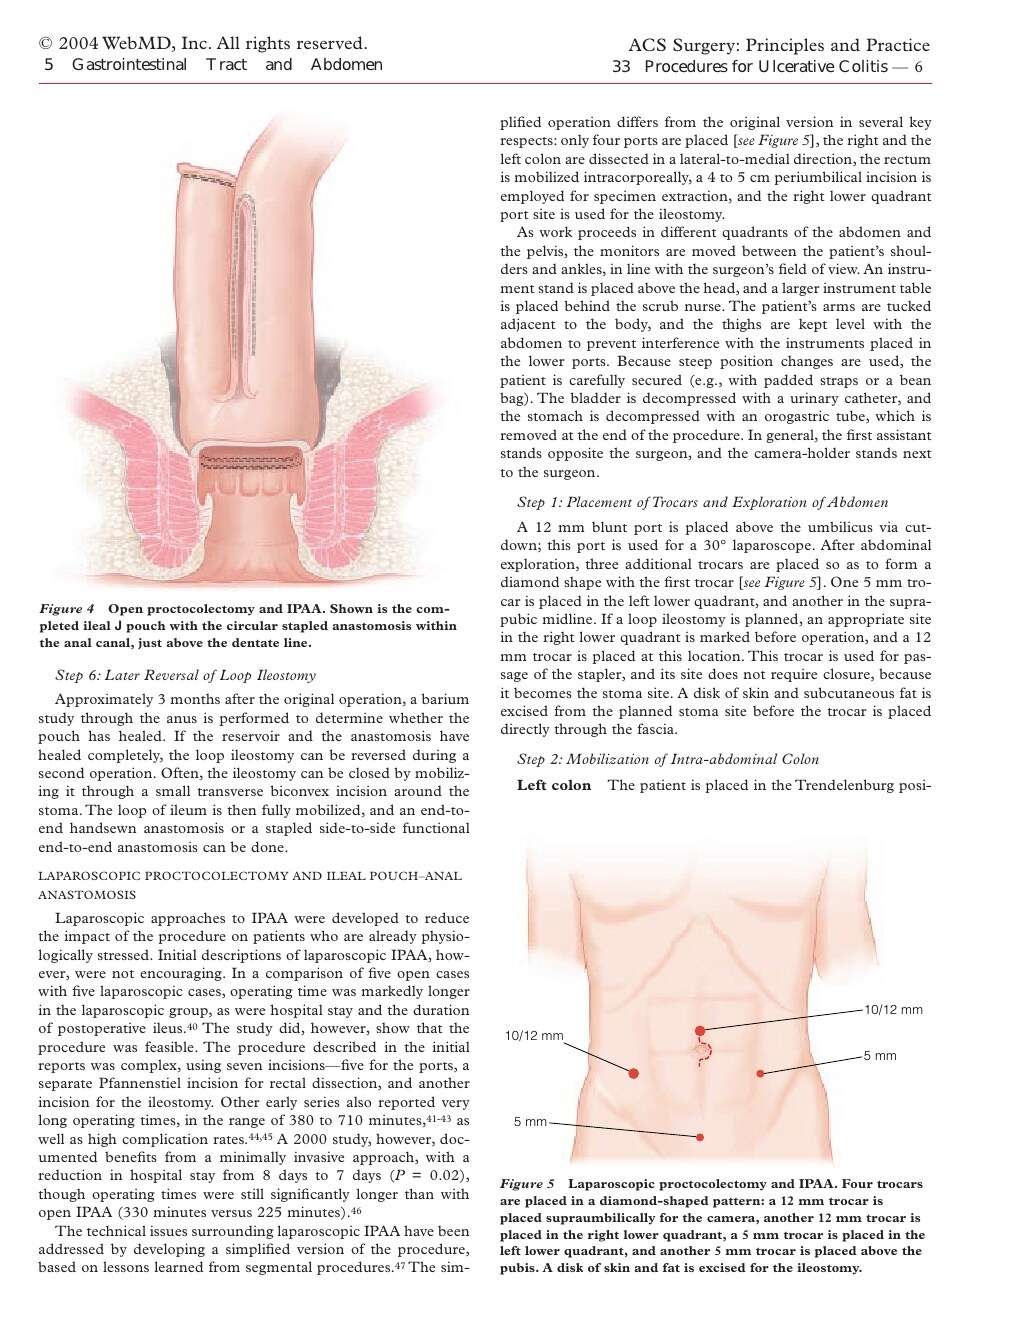 Acs0533 The Surgical Management Of Ulcerative Colitis 2004